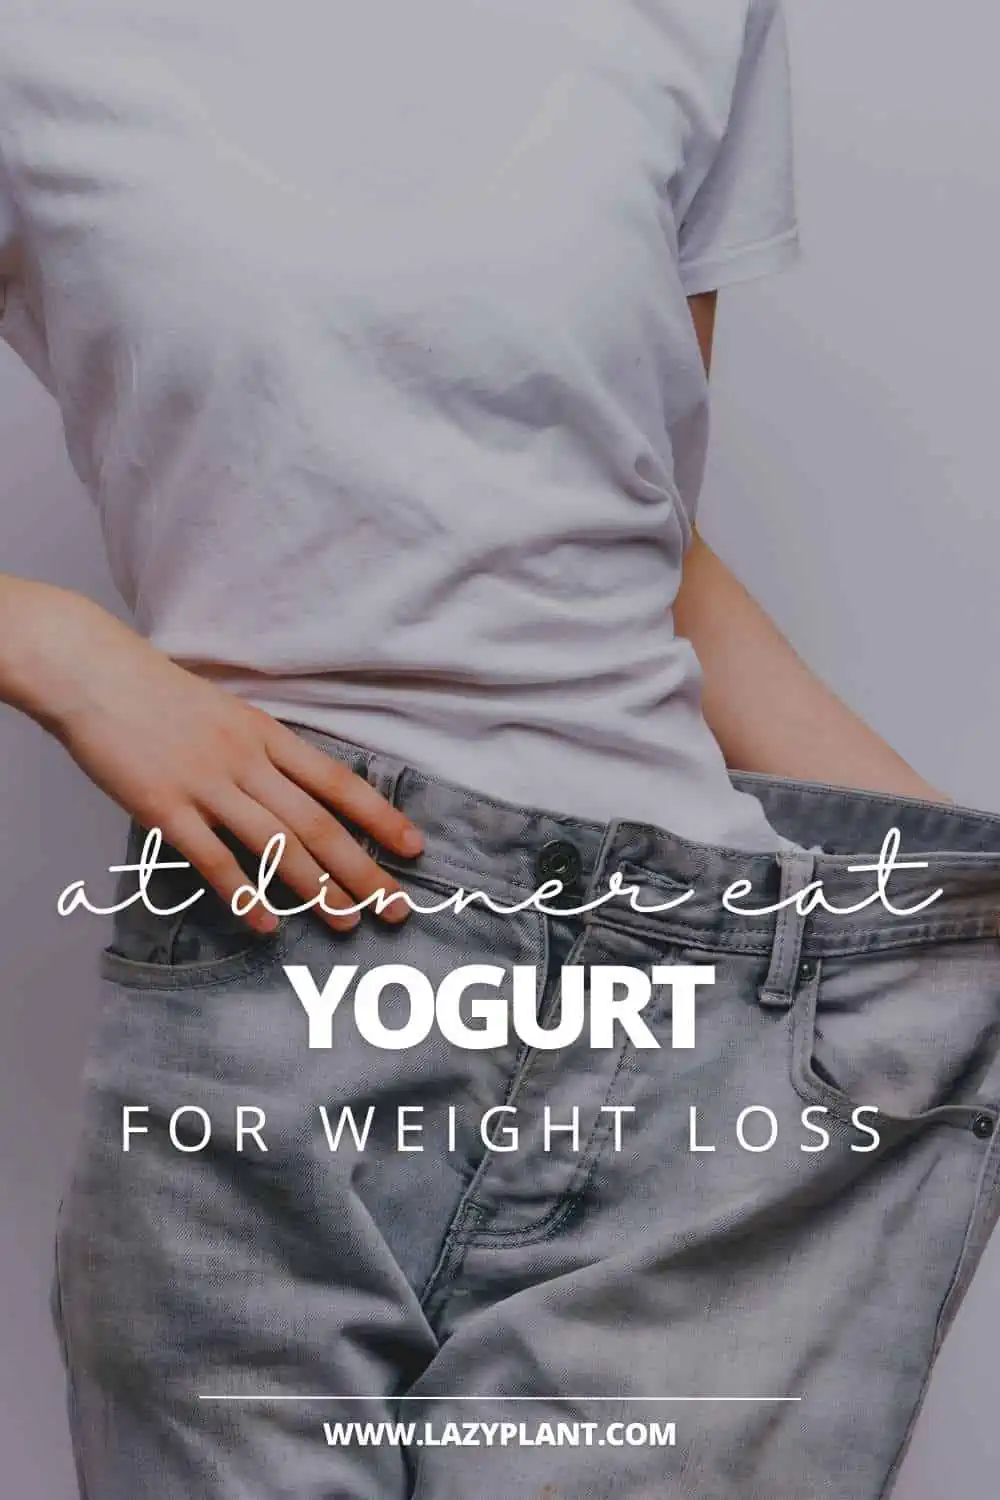 How to eat yogurt at dinner for weight loss?